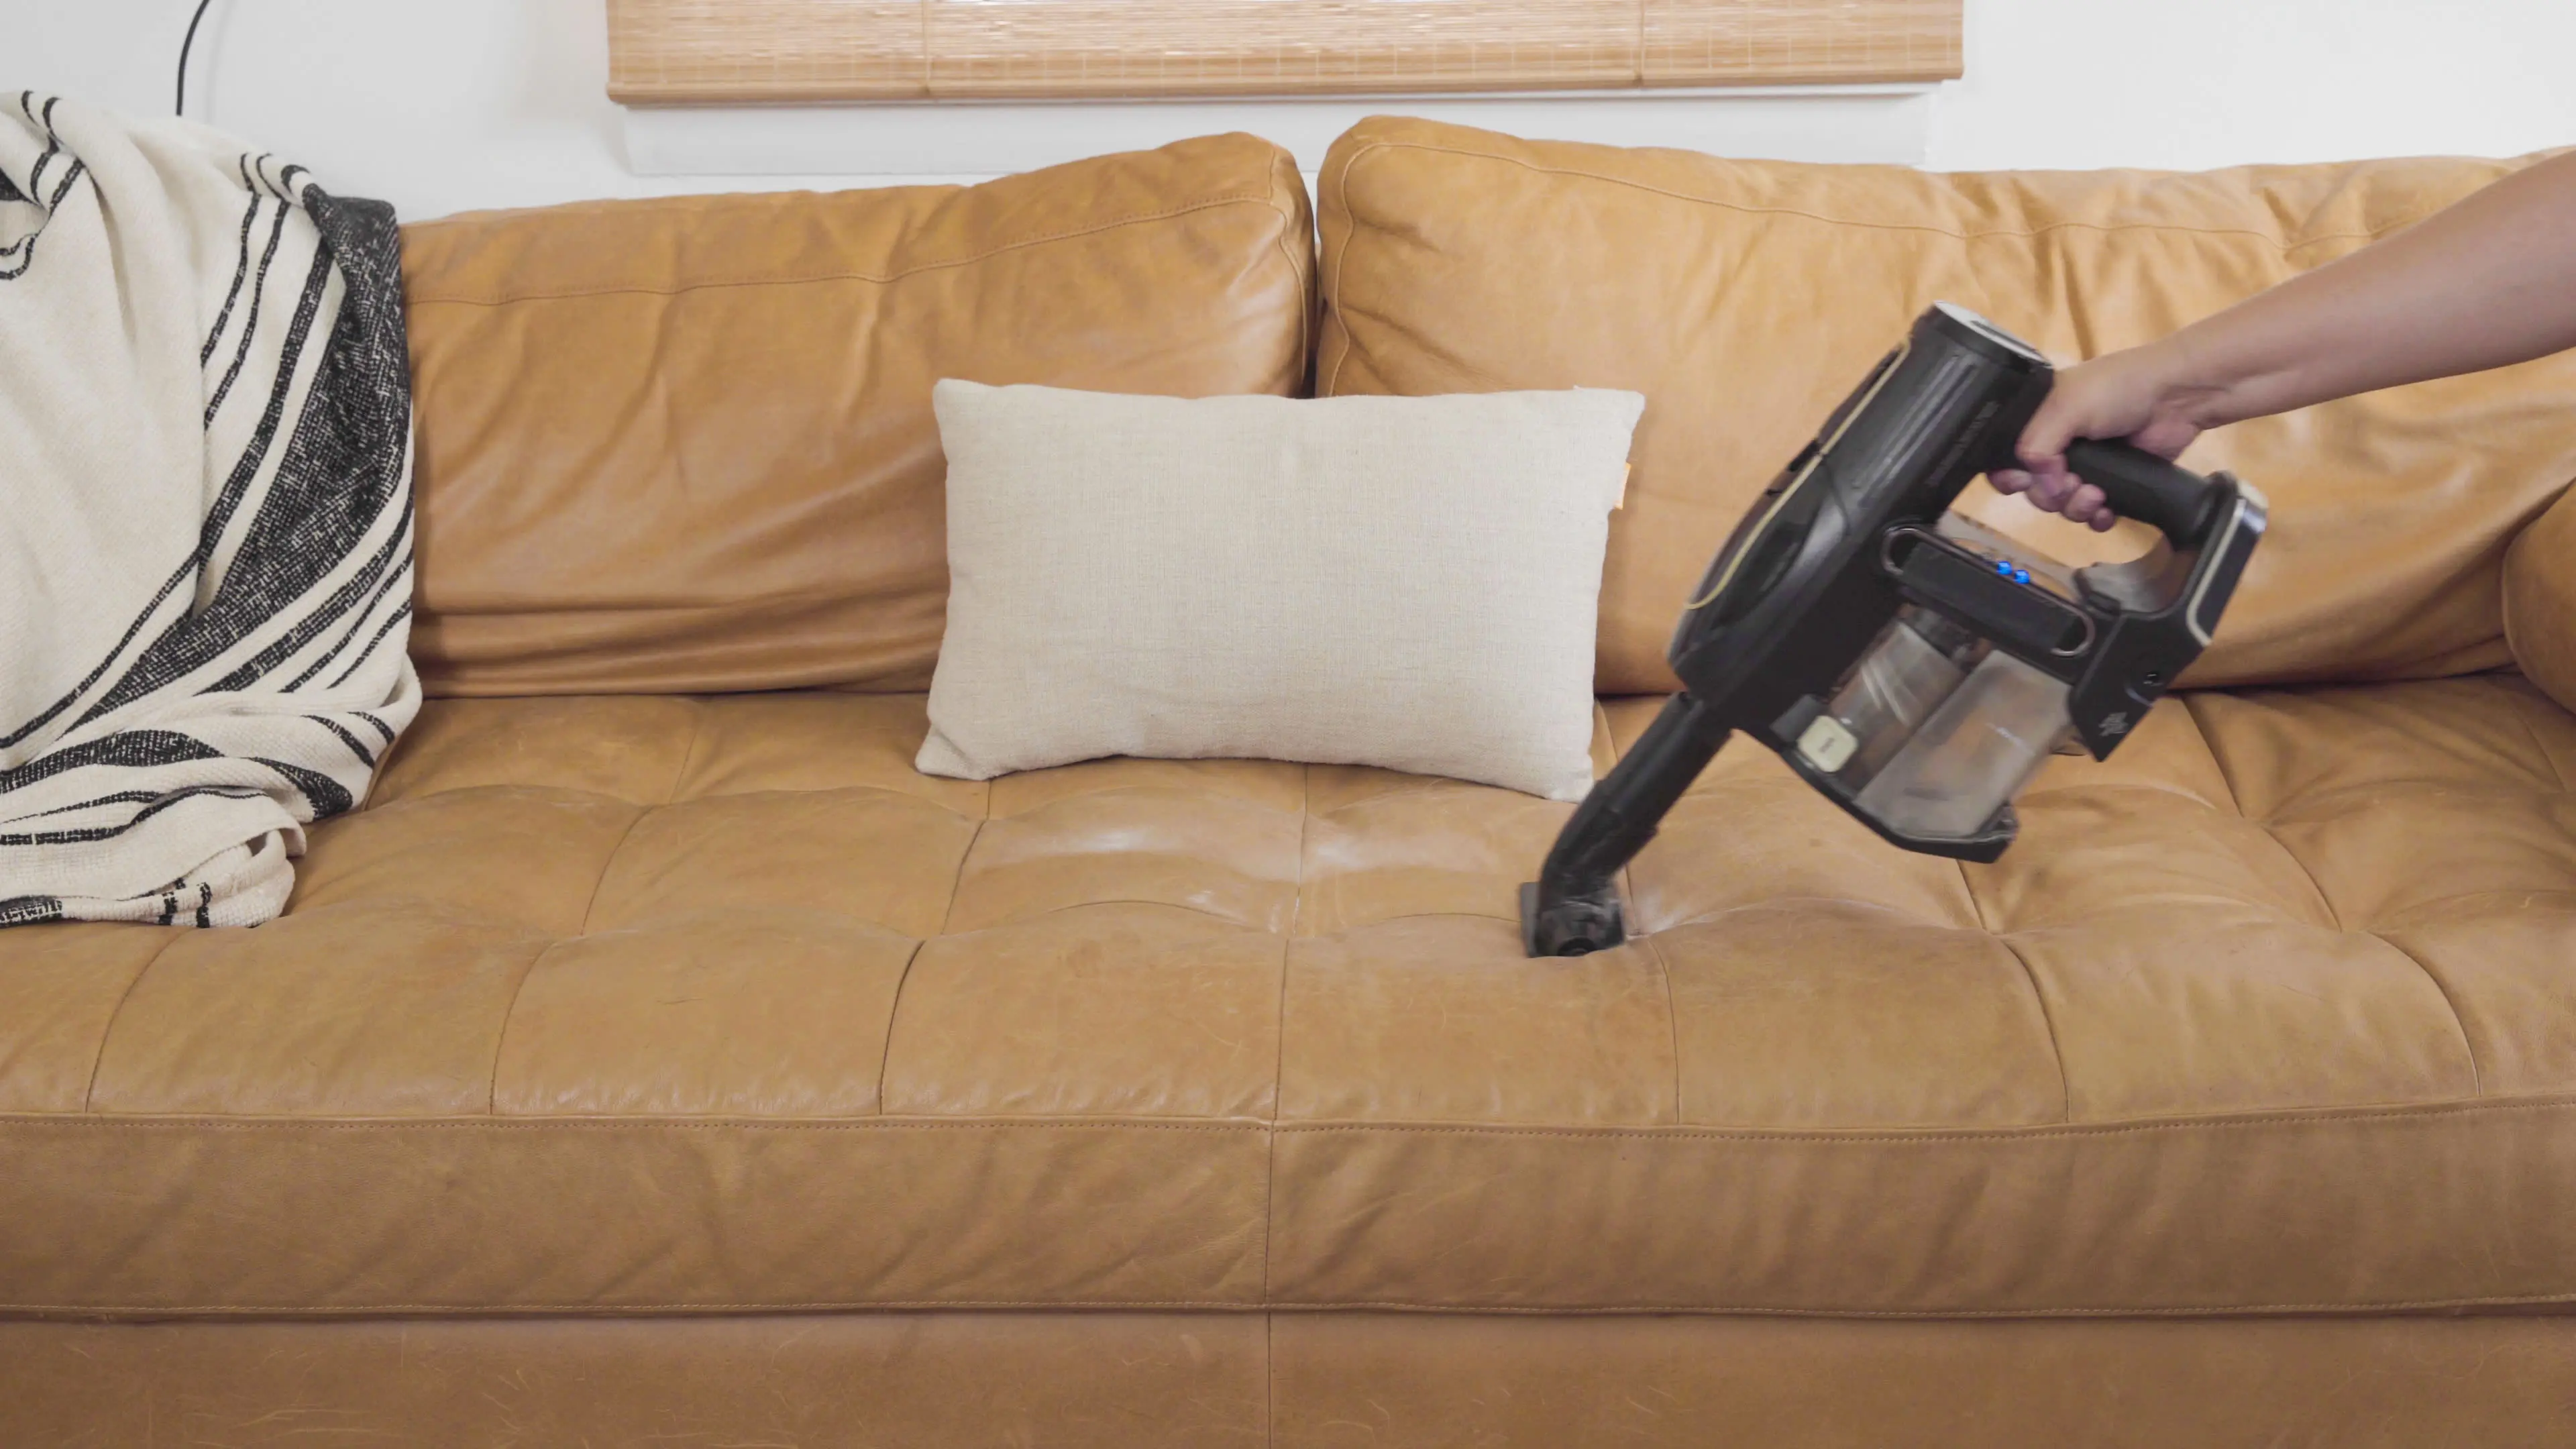 Vacuuming Couch to Remove Pet Dander and Fur